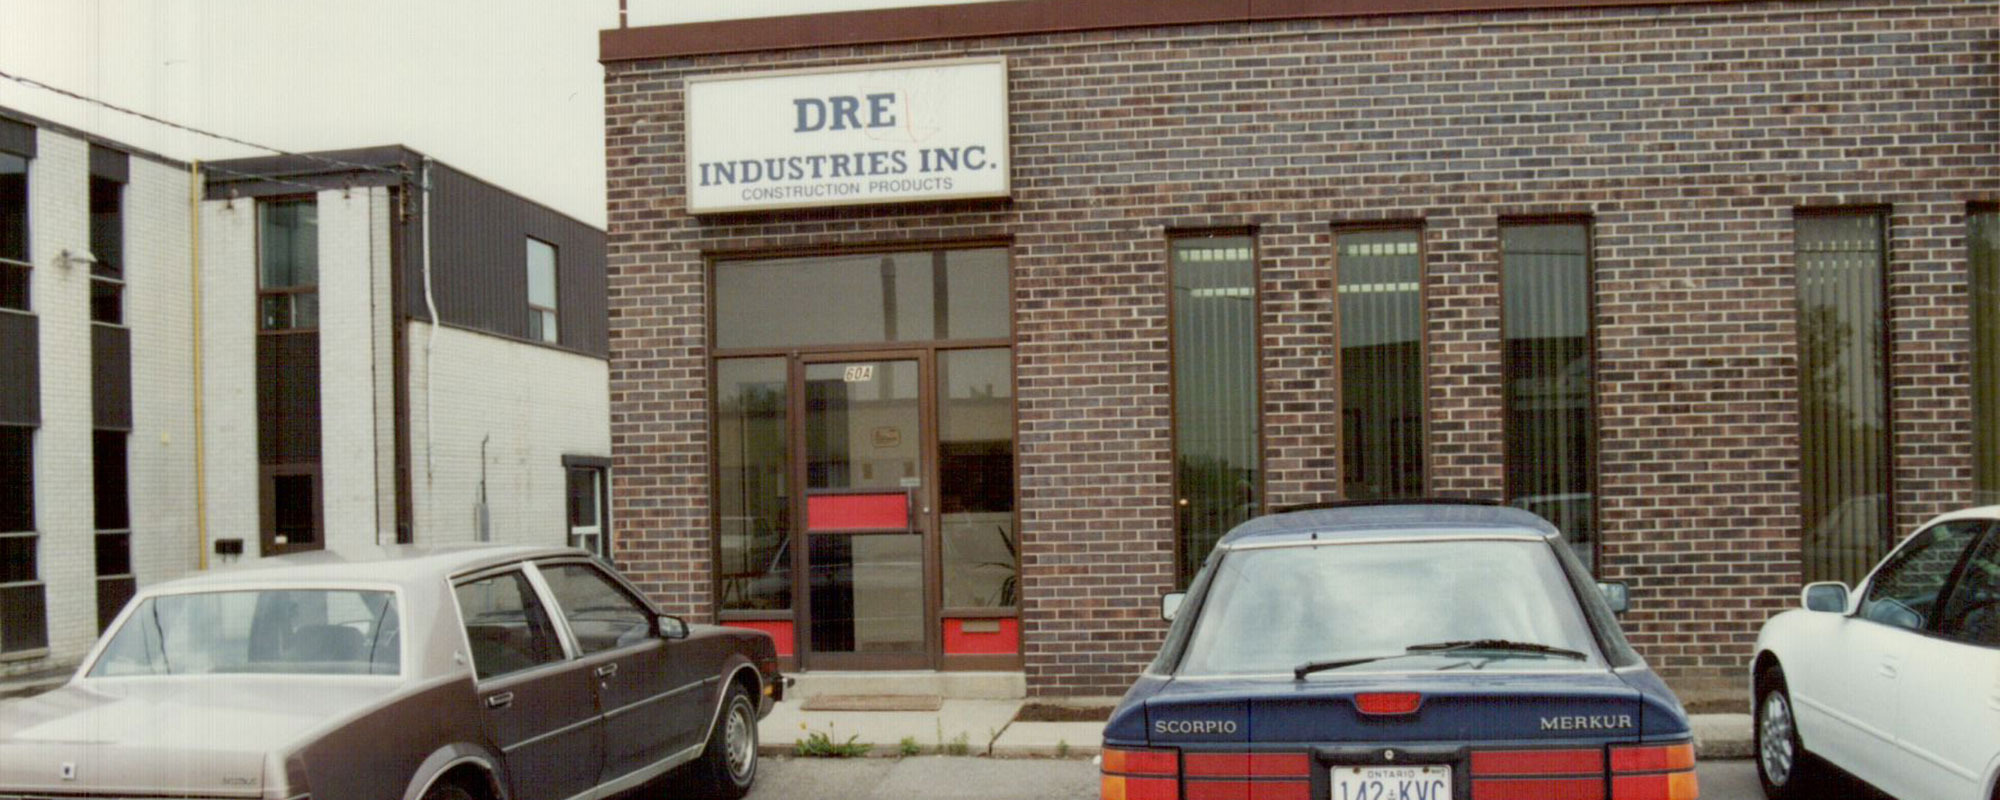 dre old location